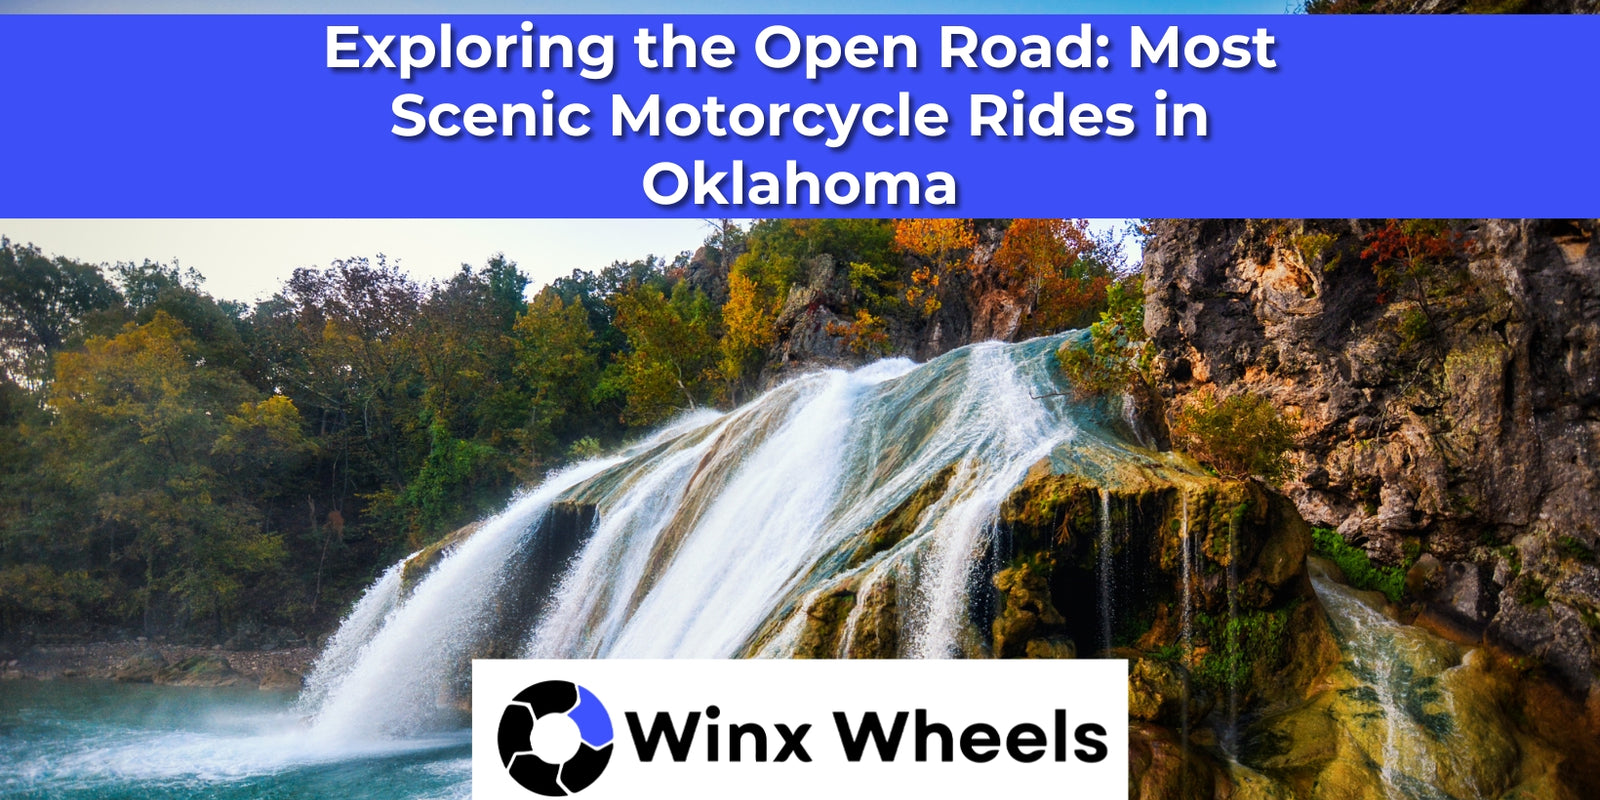 Exploring the Open Road: Most Scenic Motorcycles Rides in Oklahoma